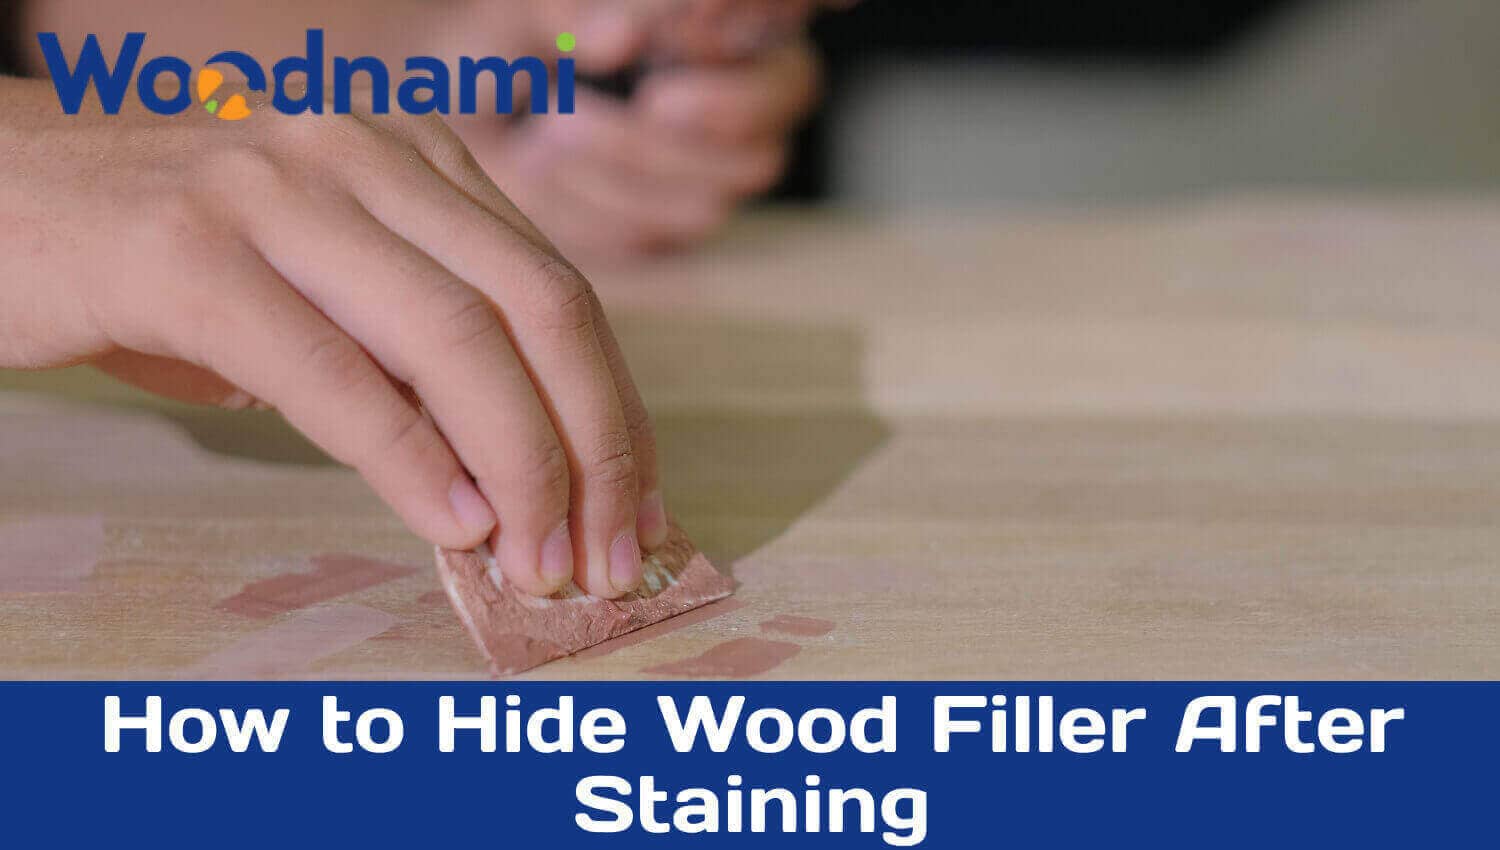 How to Hide Wood Filler After Staining